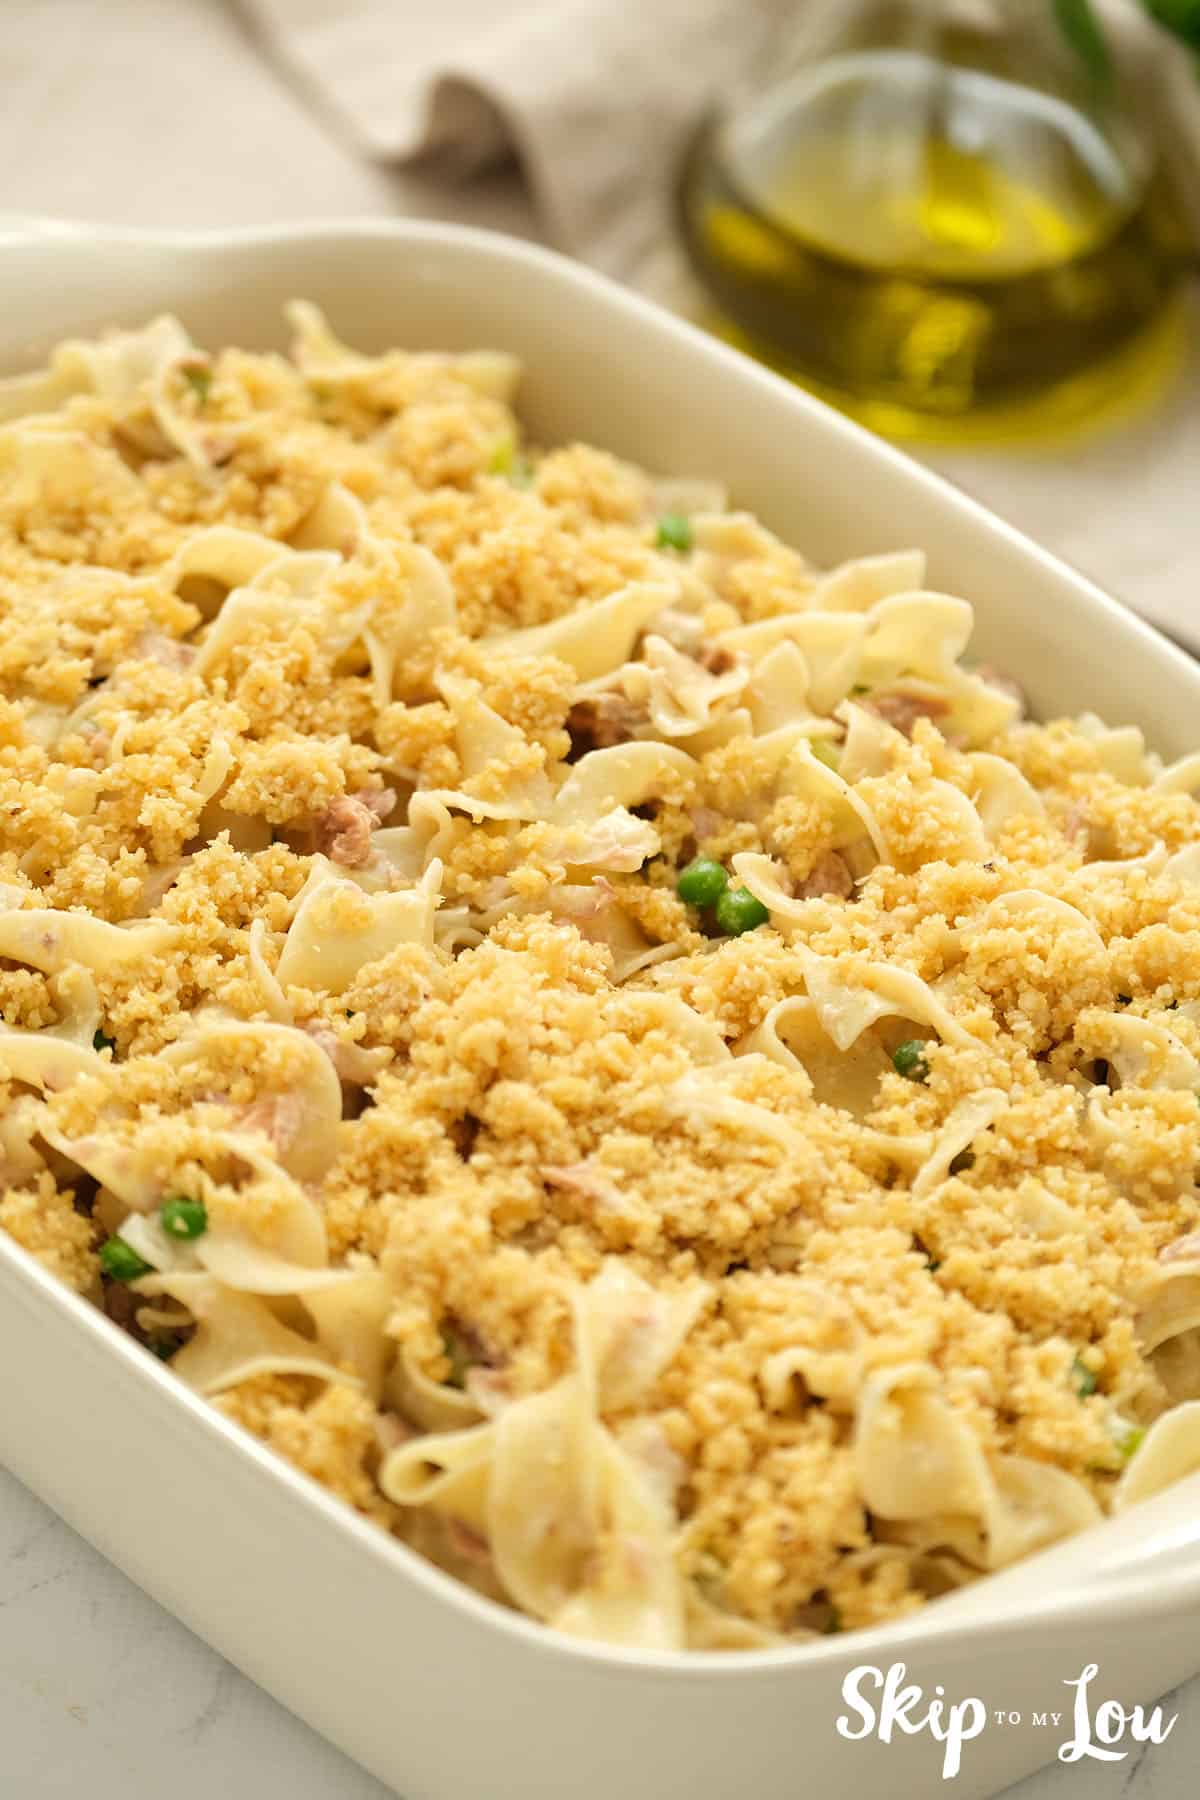 Bread crumbs sprinkled on top of Tuna Noodle Casserole